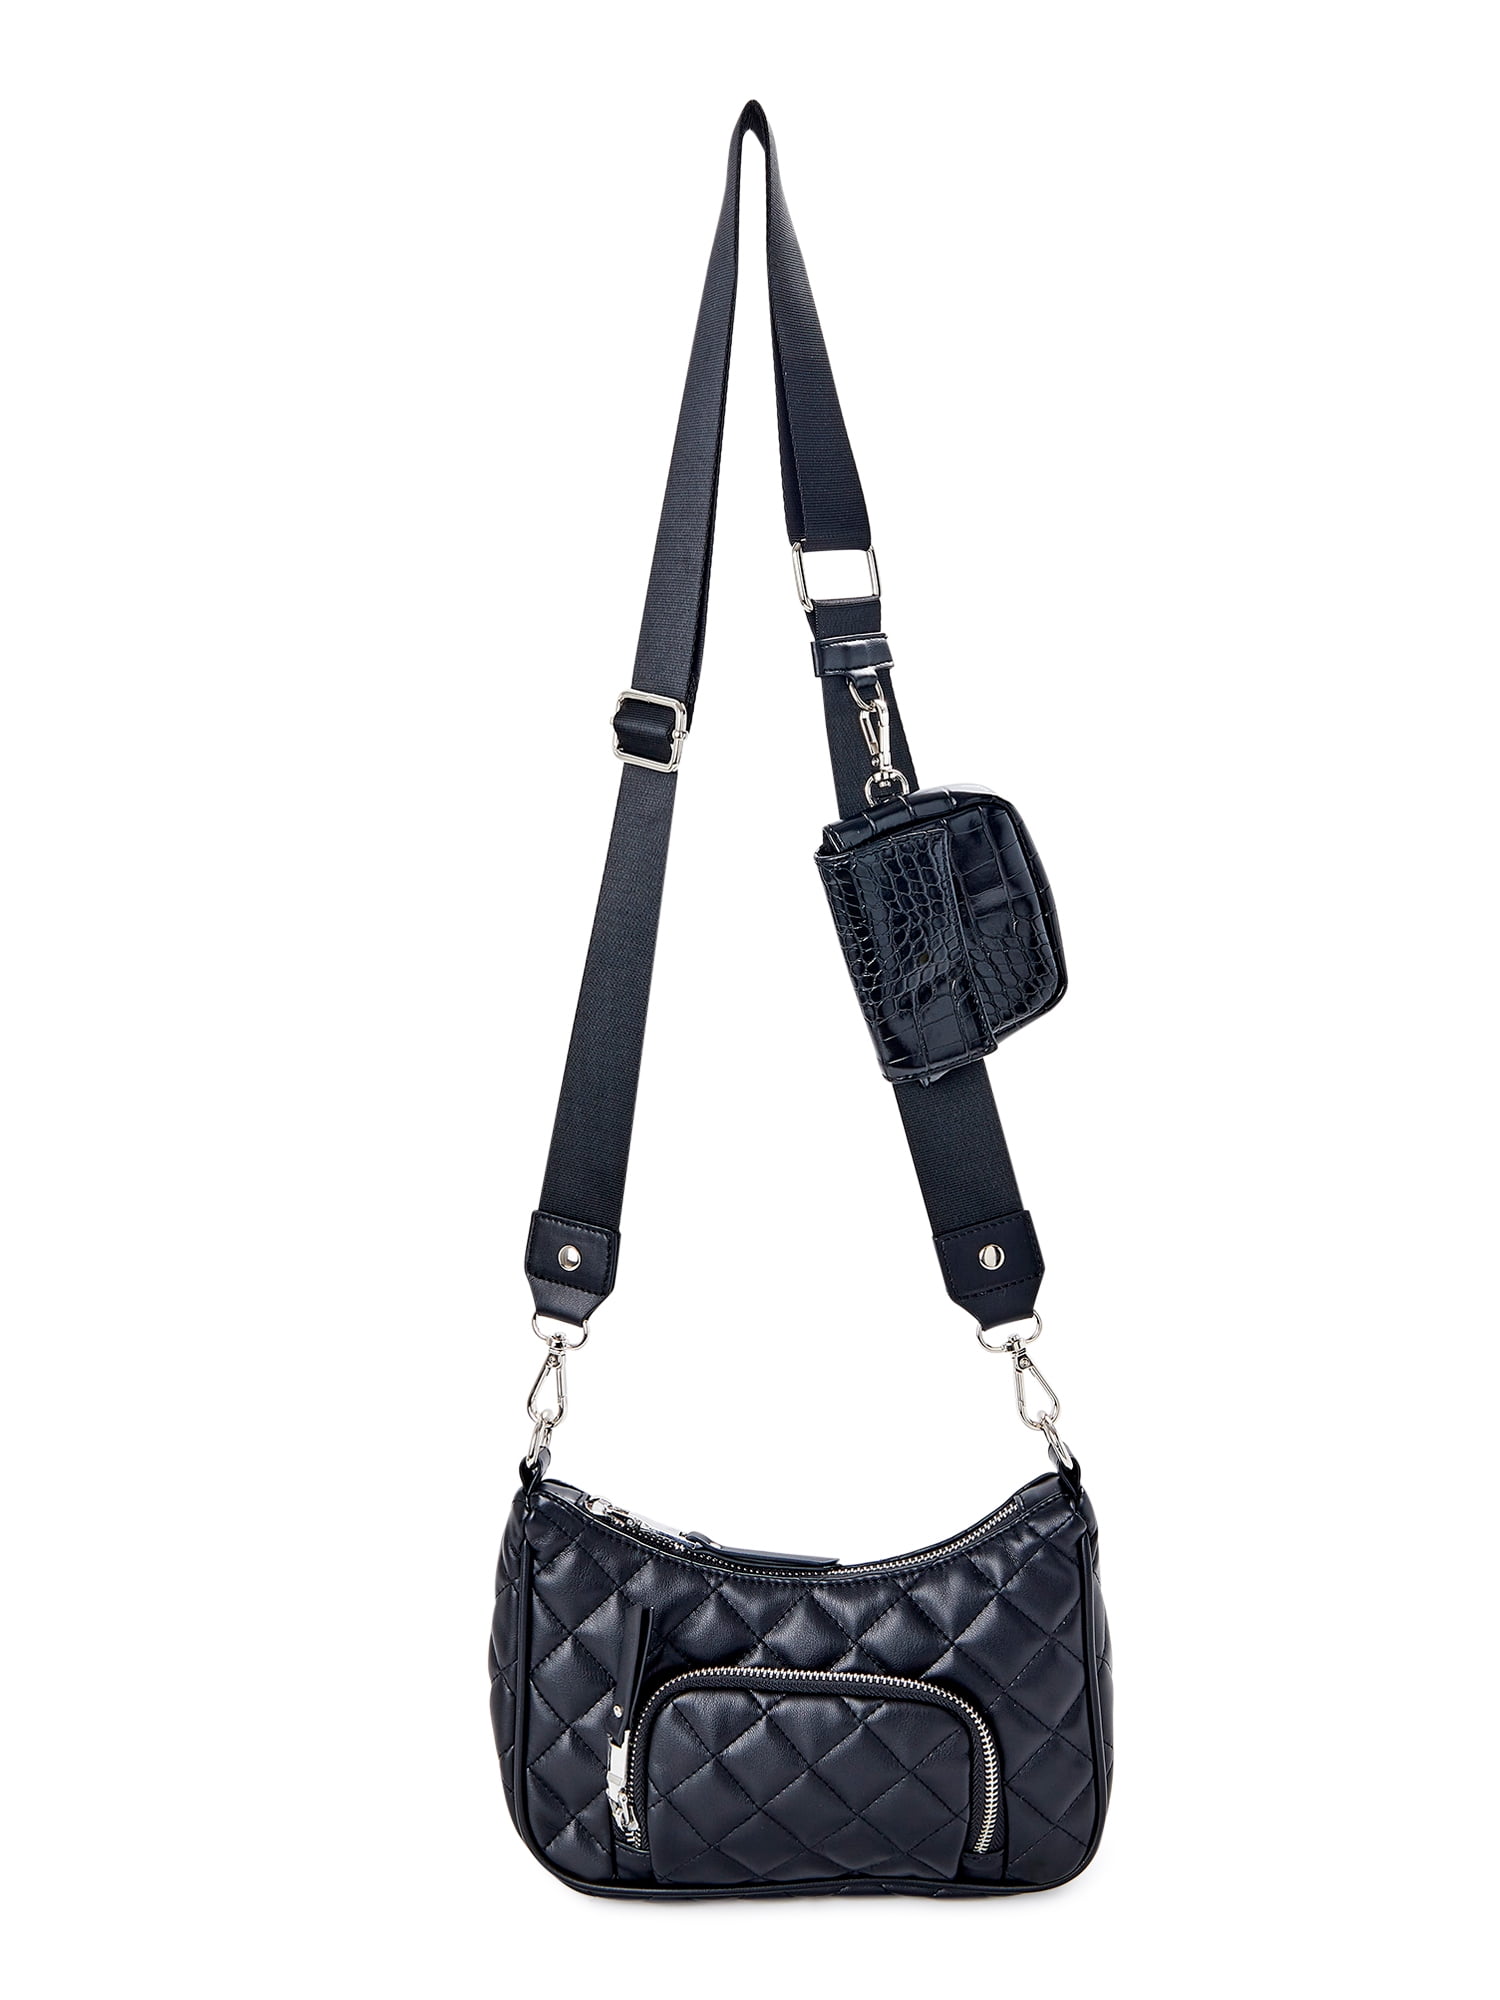 CHANEL Caviar Quilted Business Affinity Waist Belt Bag Black | FASHIONPHILE